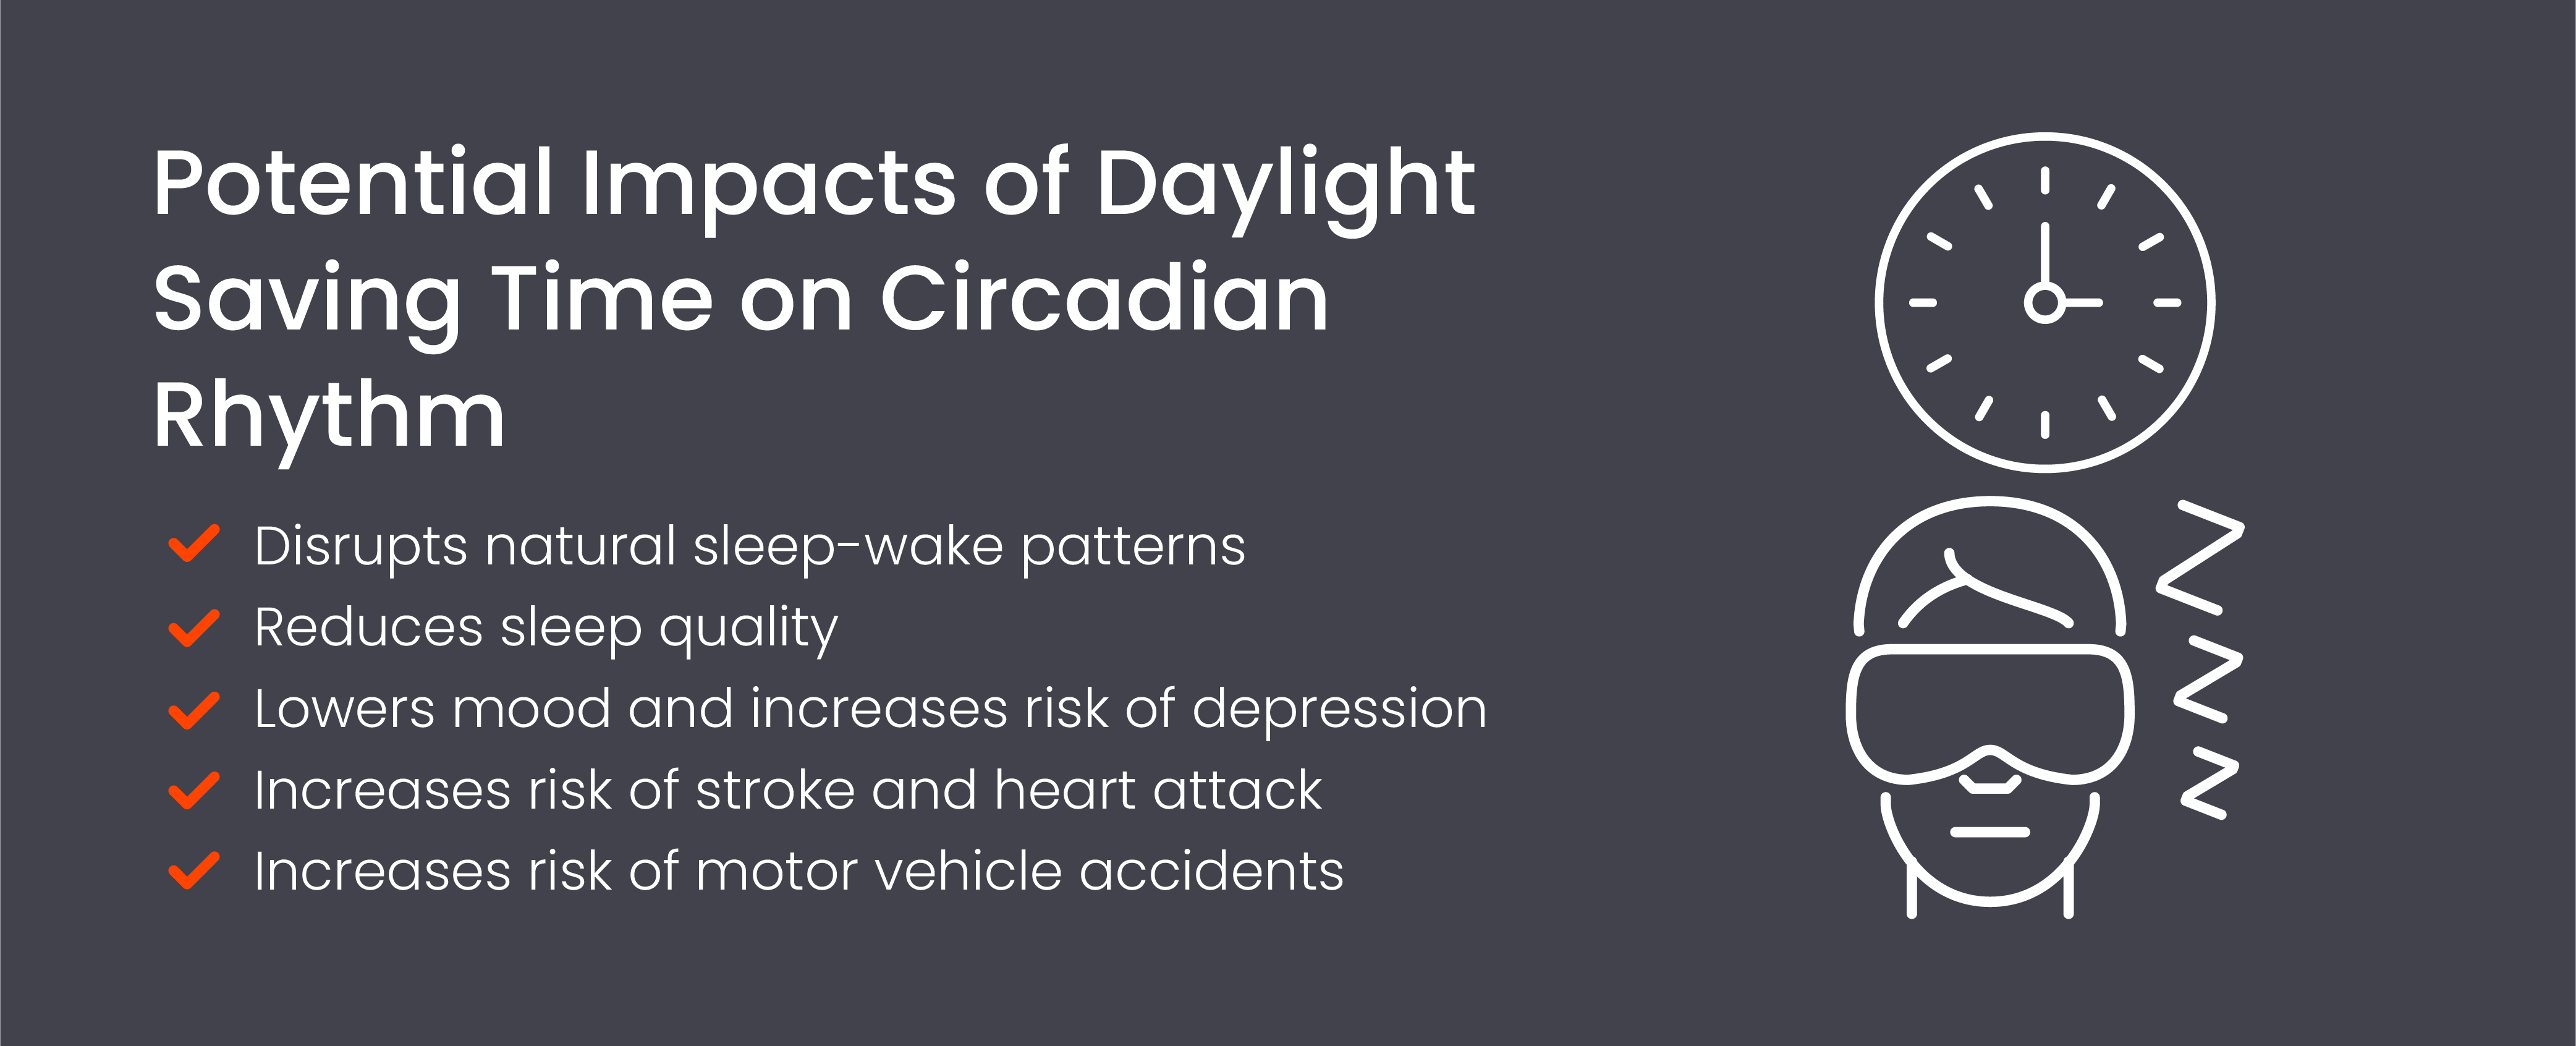 Potential Impacts of Daylight Saving Time on Circadian Rhythm